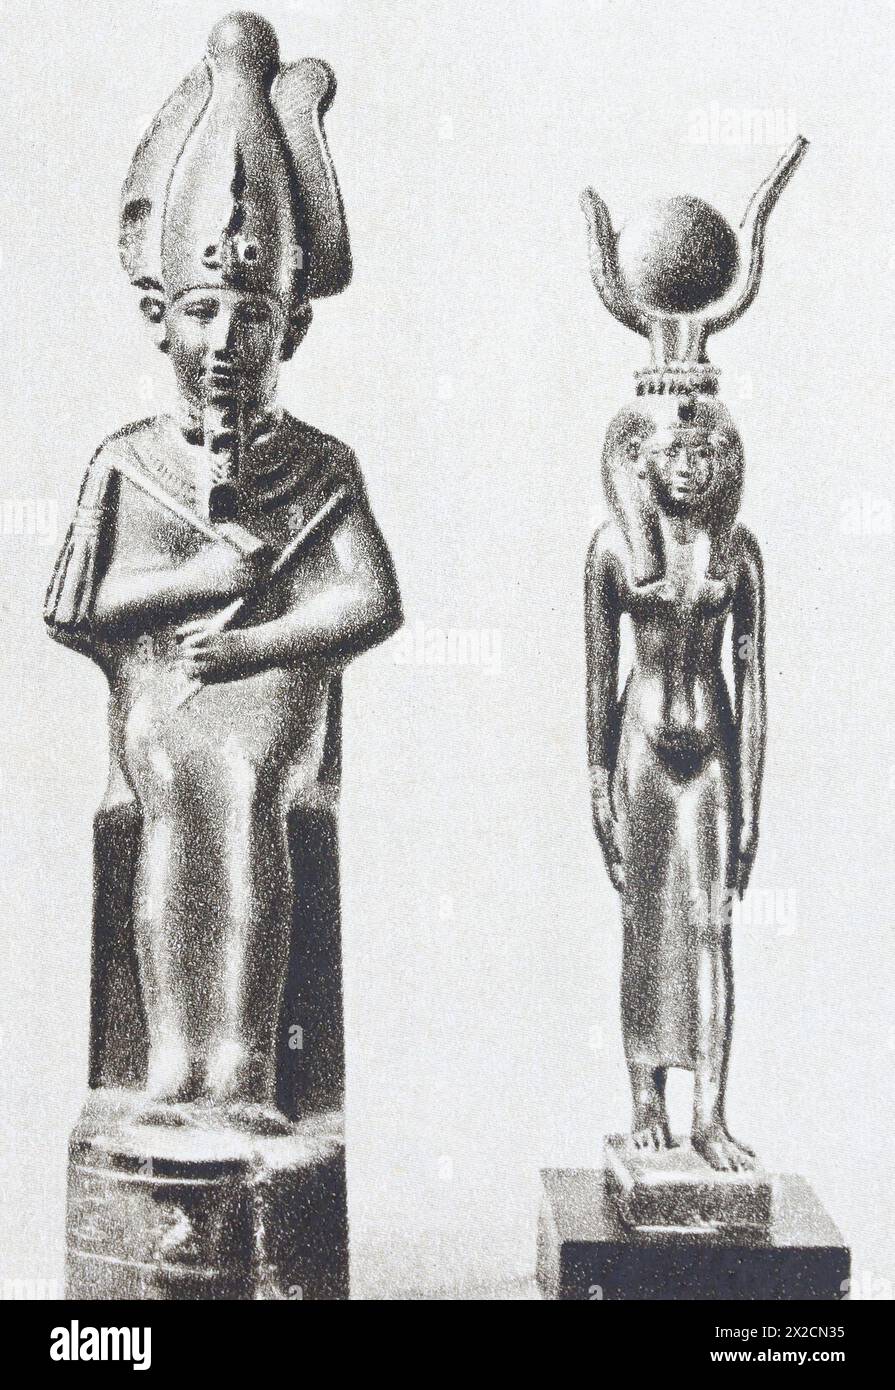 Ancient Egyptian figurines of Osiris and Isis from the 1st millennium BC. Photo from the mid-20th century. Stock Photo